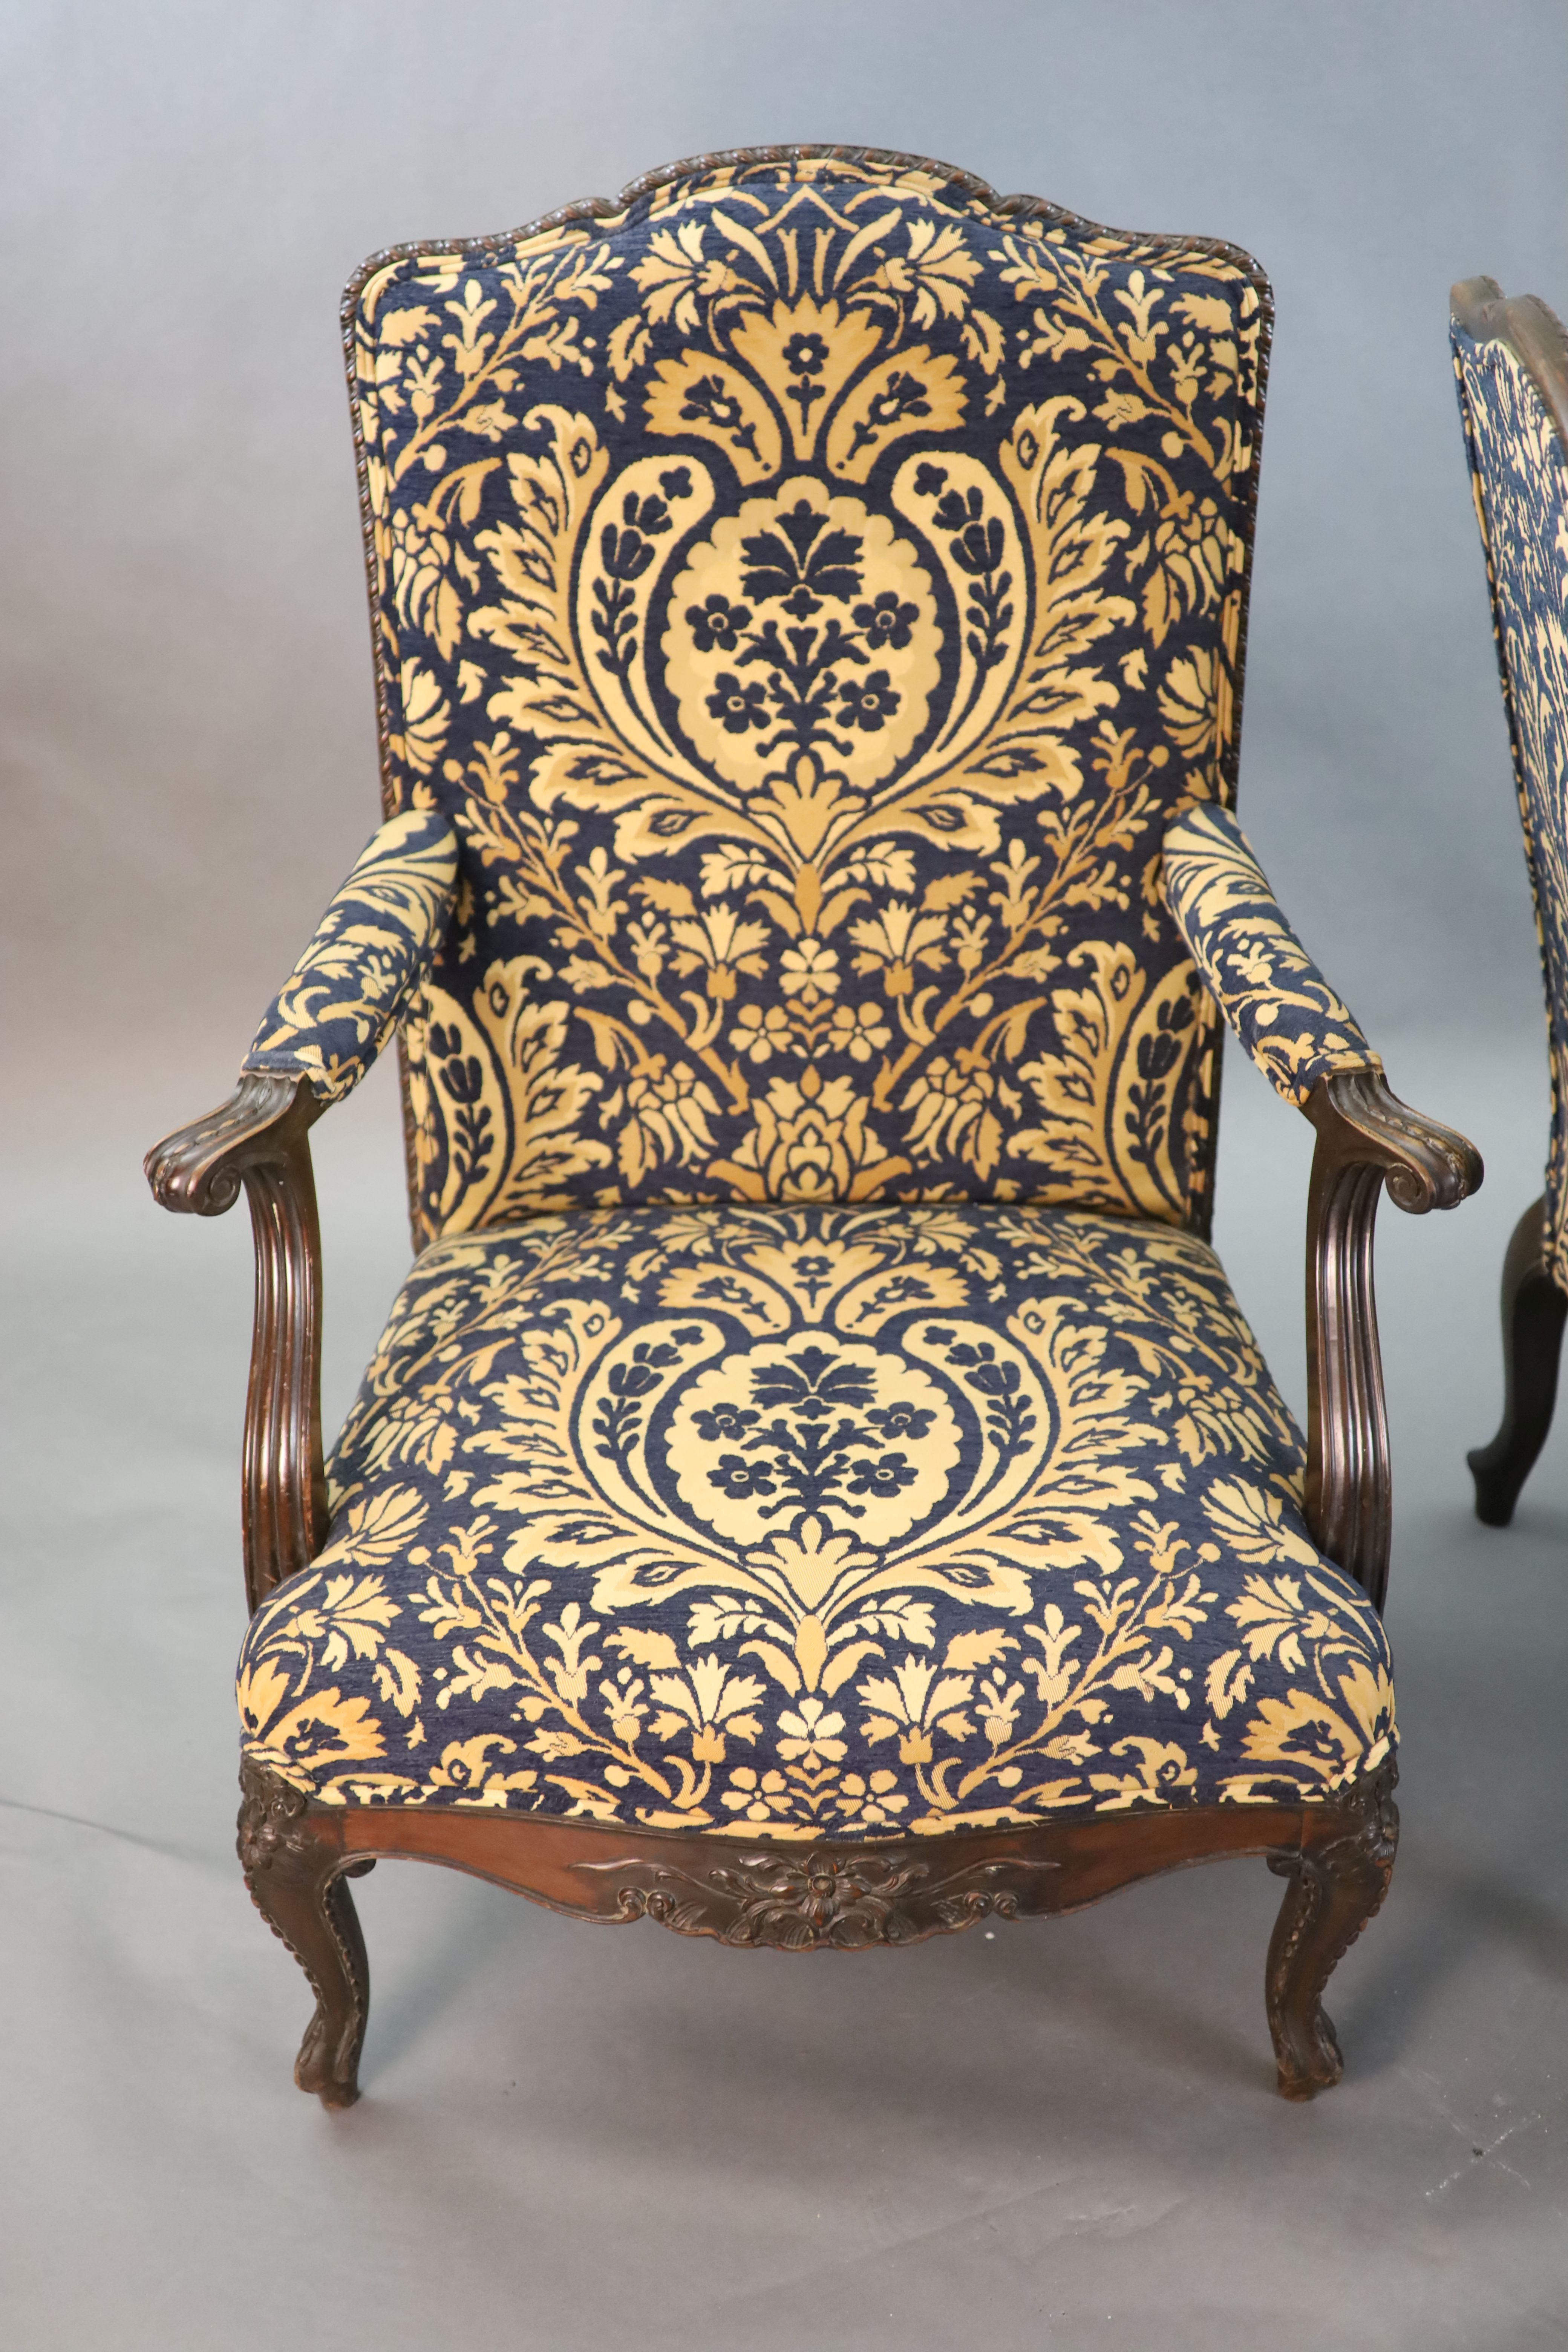 A pair of Louis XVI style mahogany fauteuils, W.2ft 6in. D.2ft 5in. H.3ft 6in.